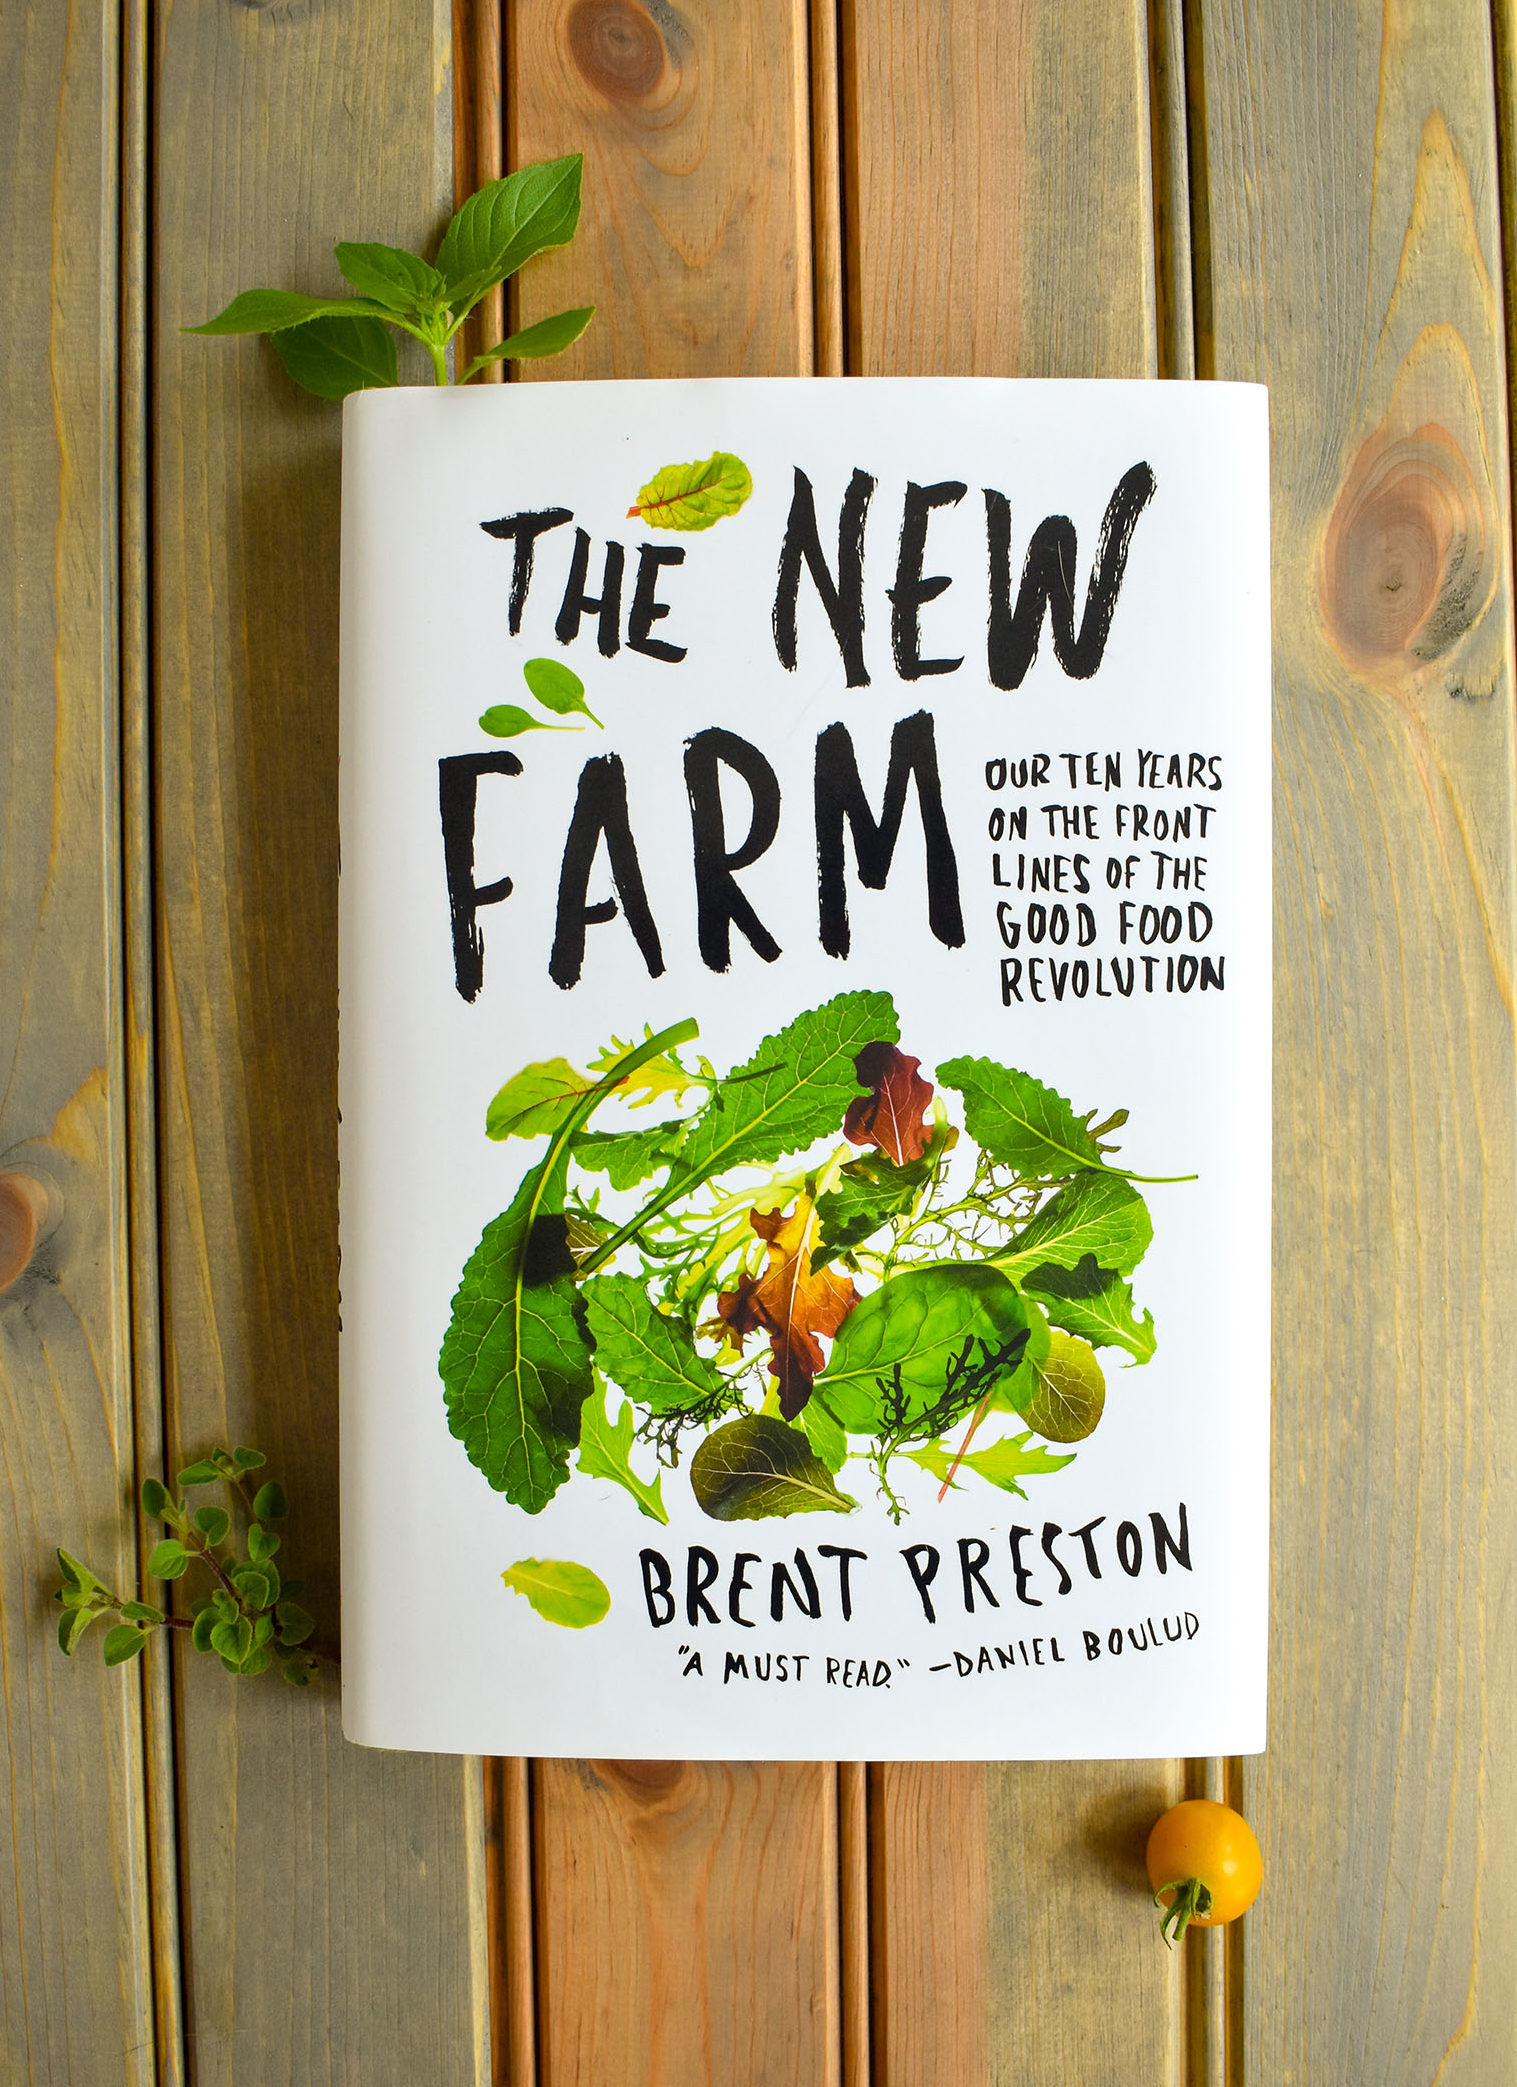 The New Farm: Our Ten Years on the Front Lines of the Good Food Revolution